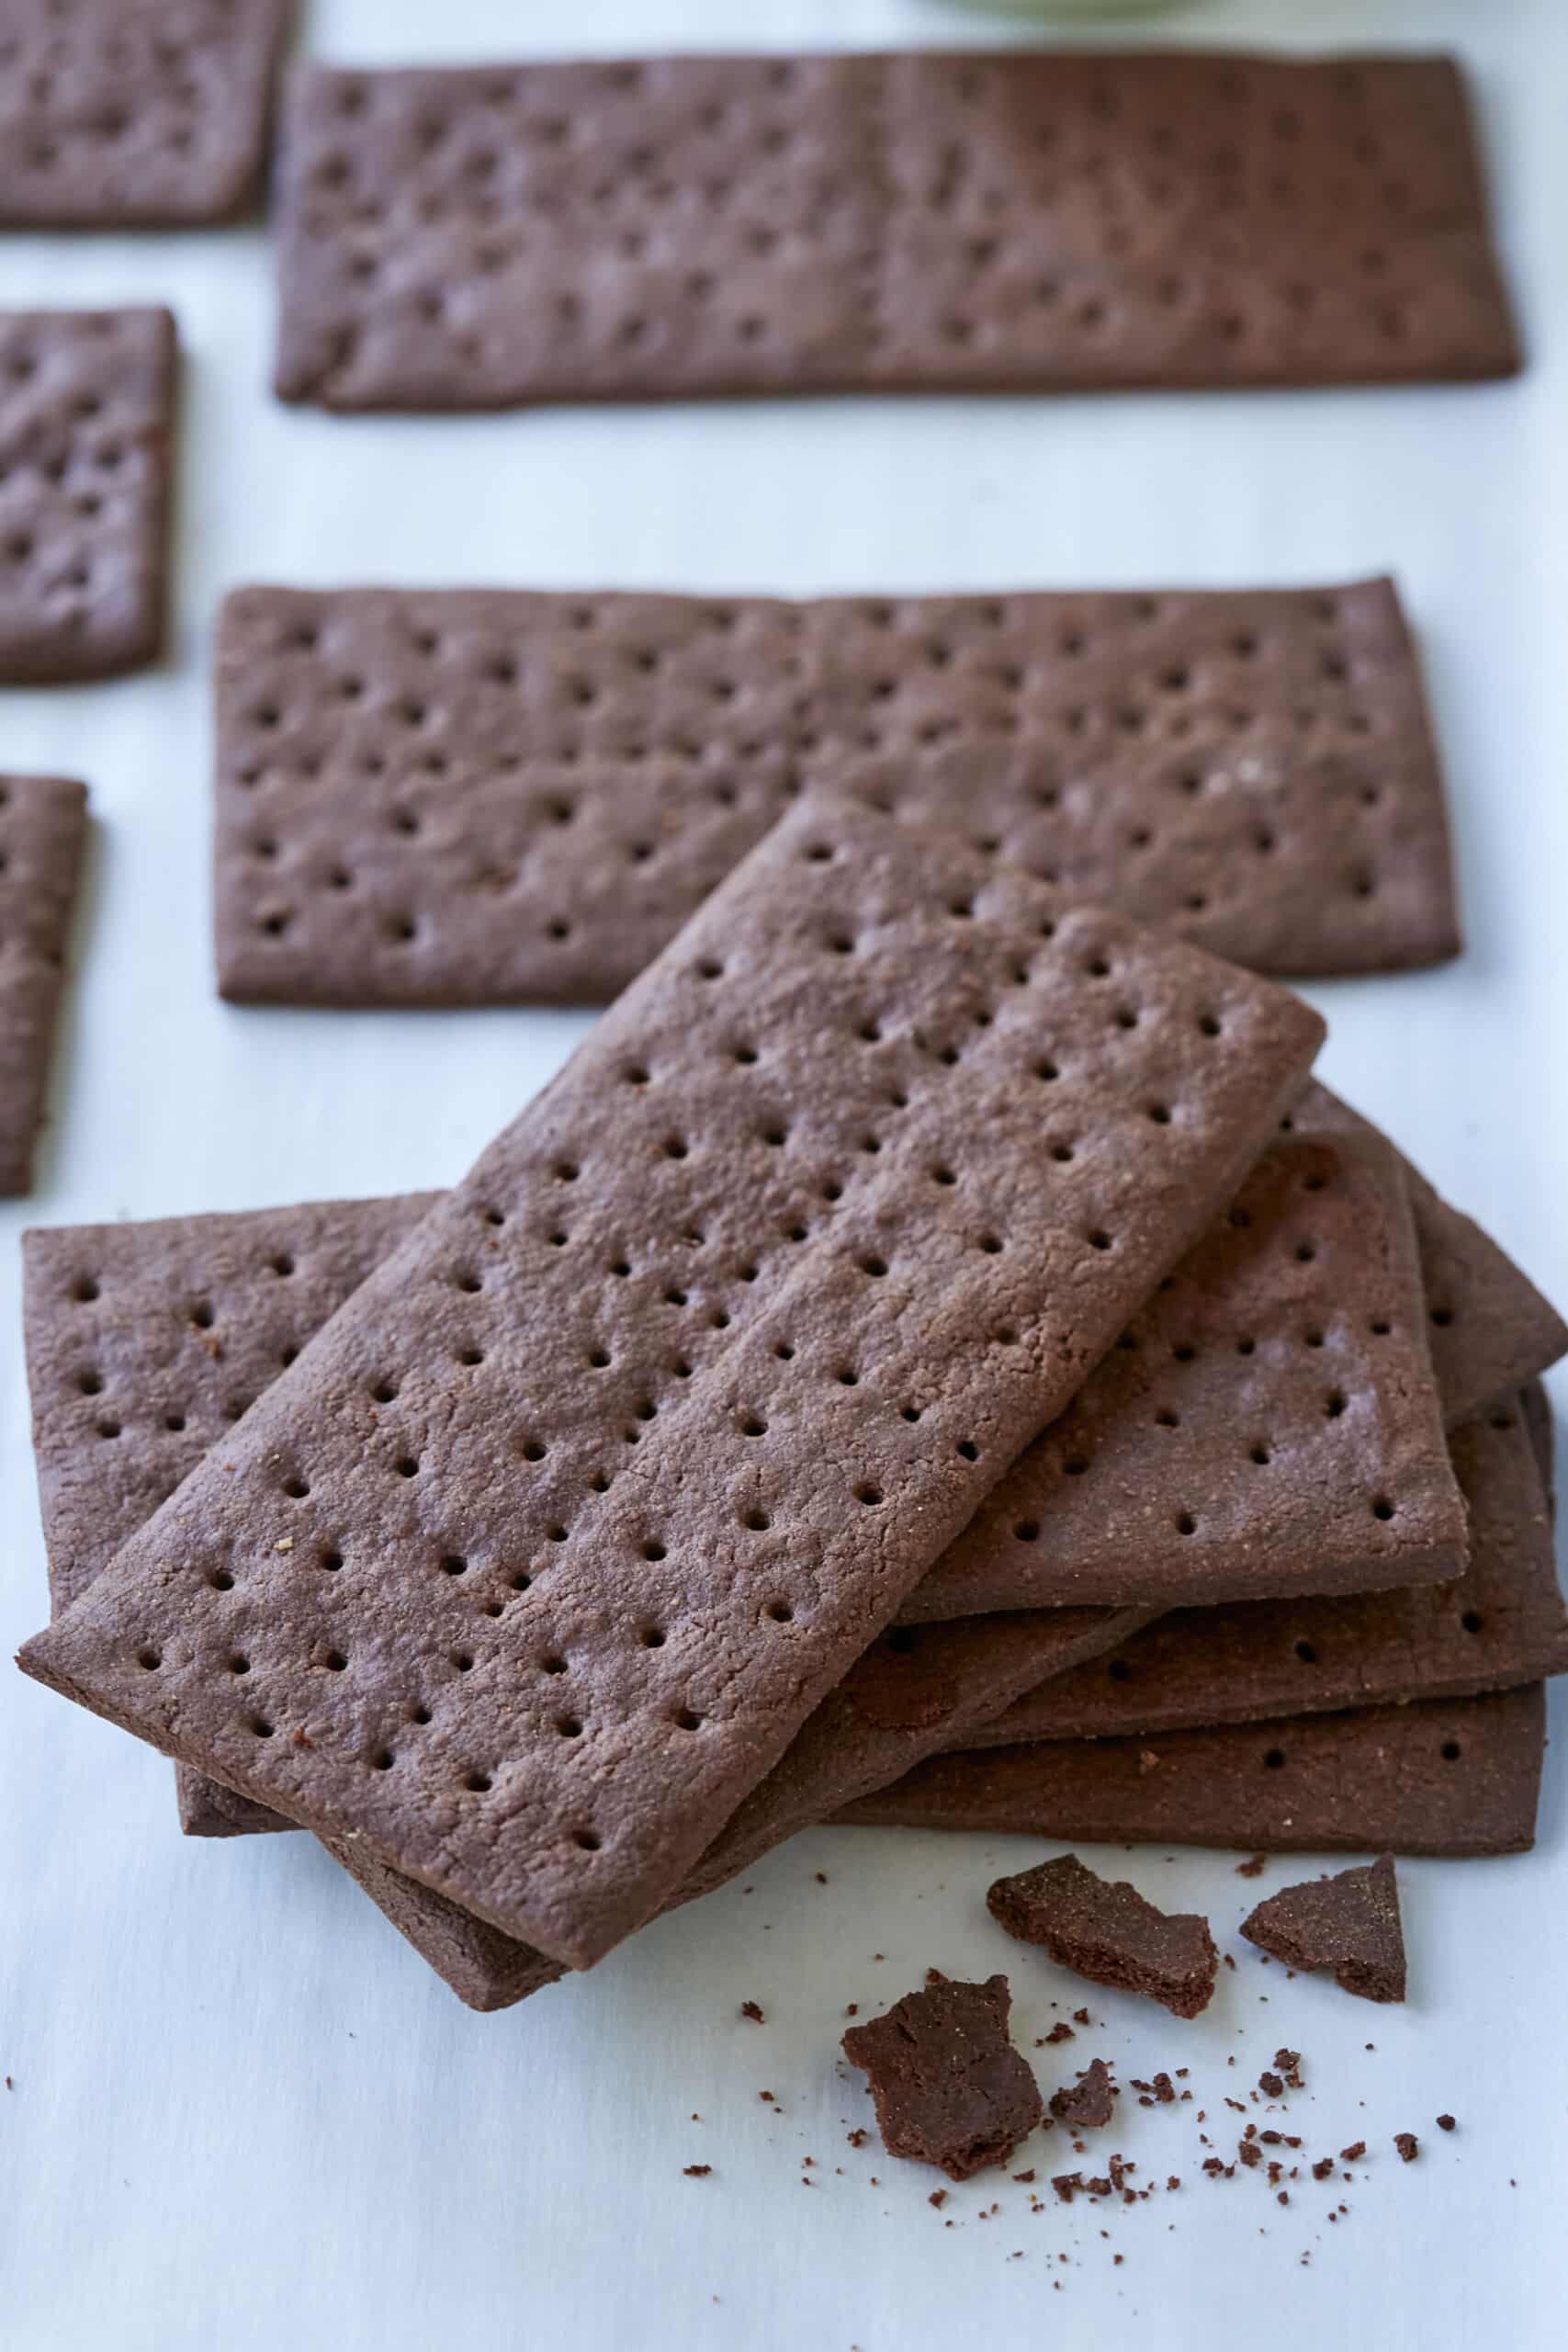 A close-up shot at a stack of Homemade Chocolate Graham Crackers shows the dark chocolate color and crumbly crispy texture.